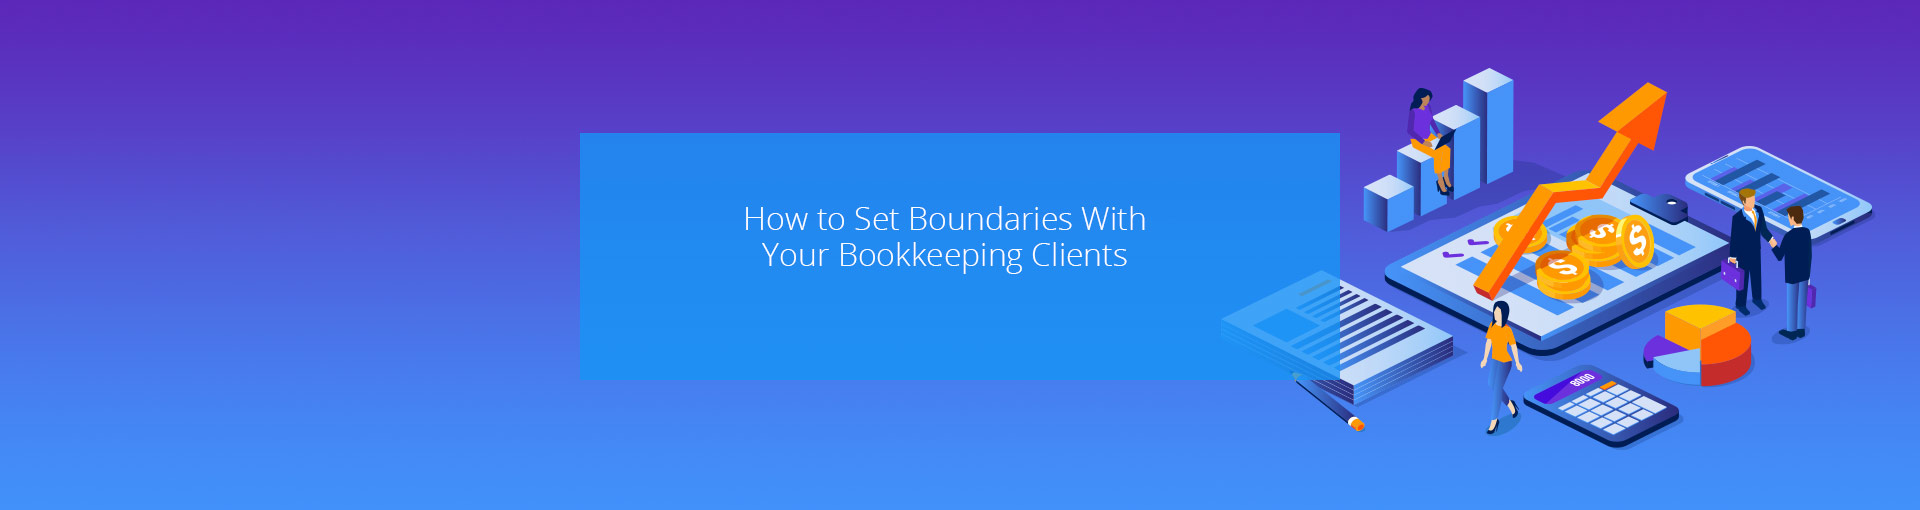 How to Set Boundaries With Your Bookkeeping Clients Featured Image